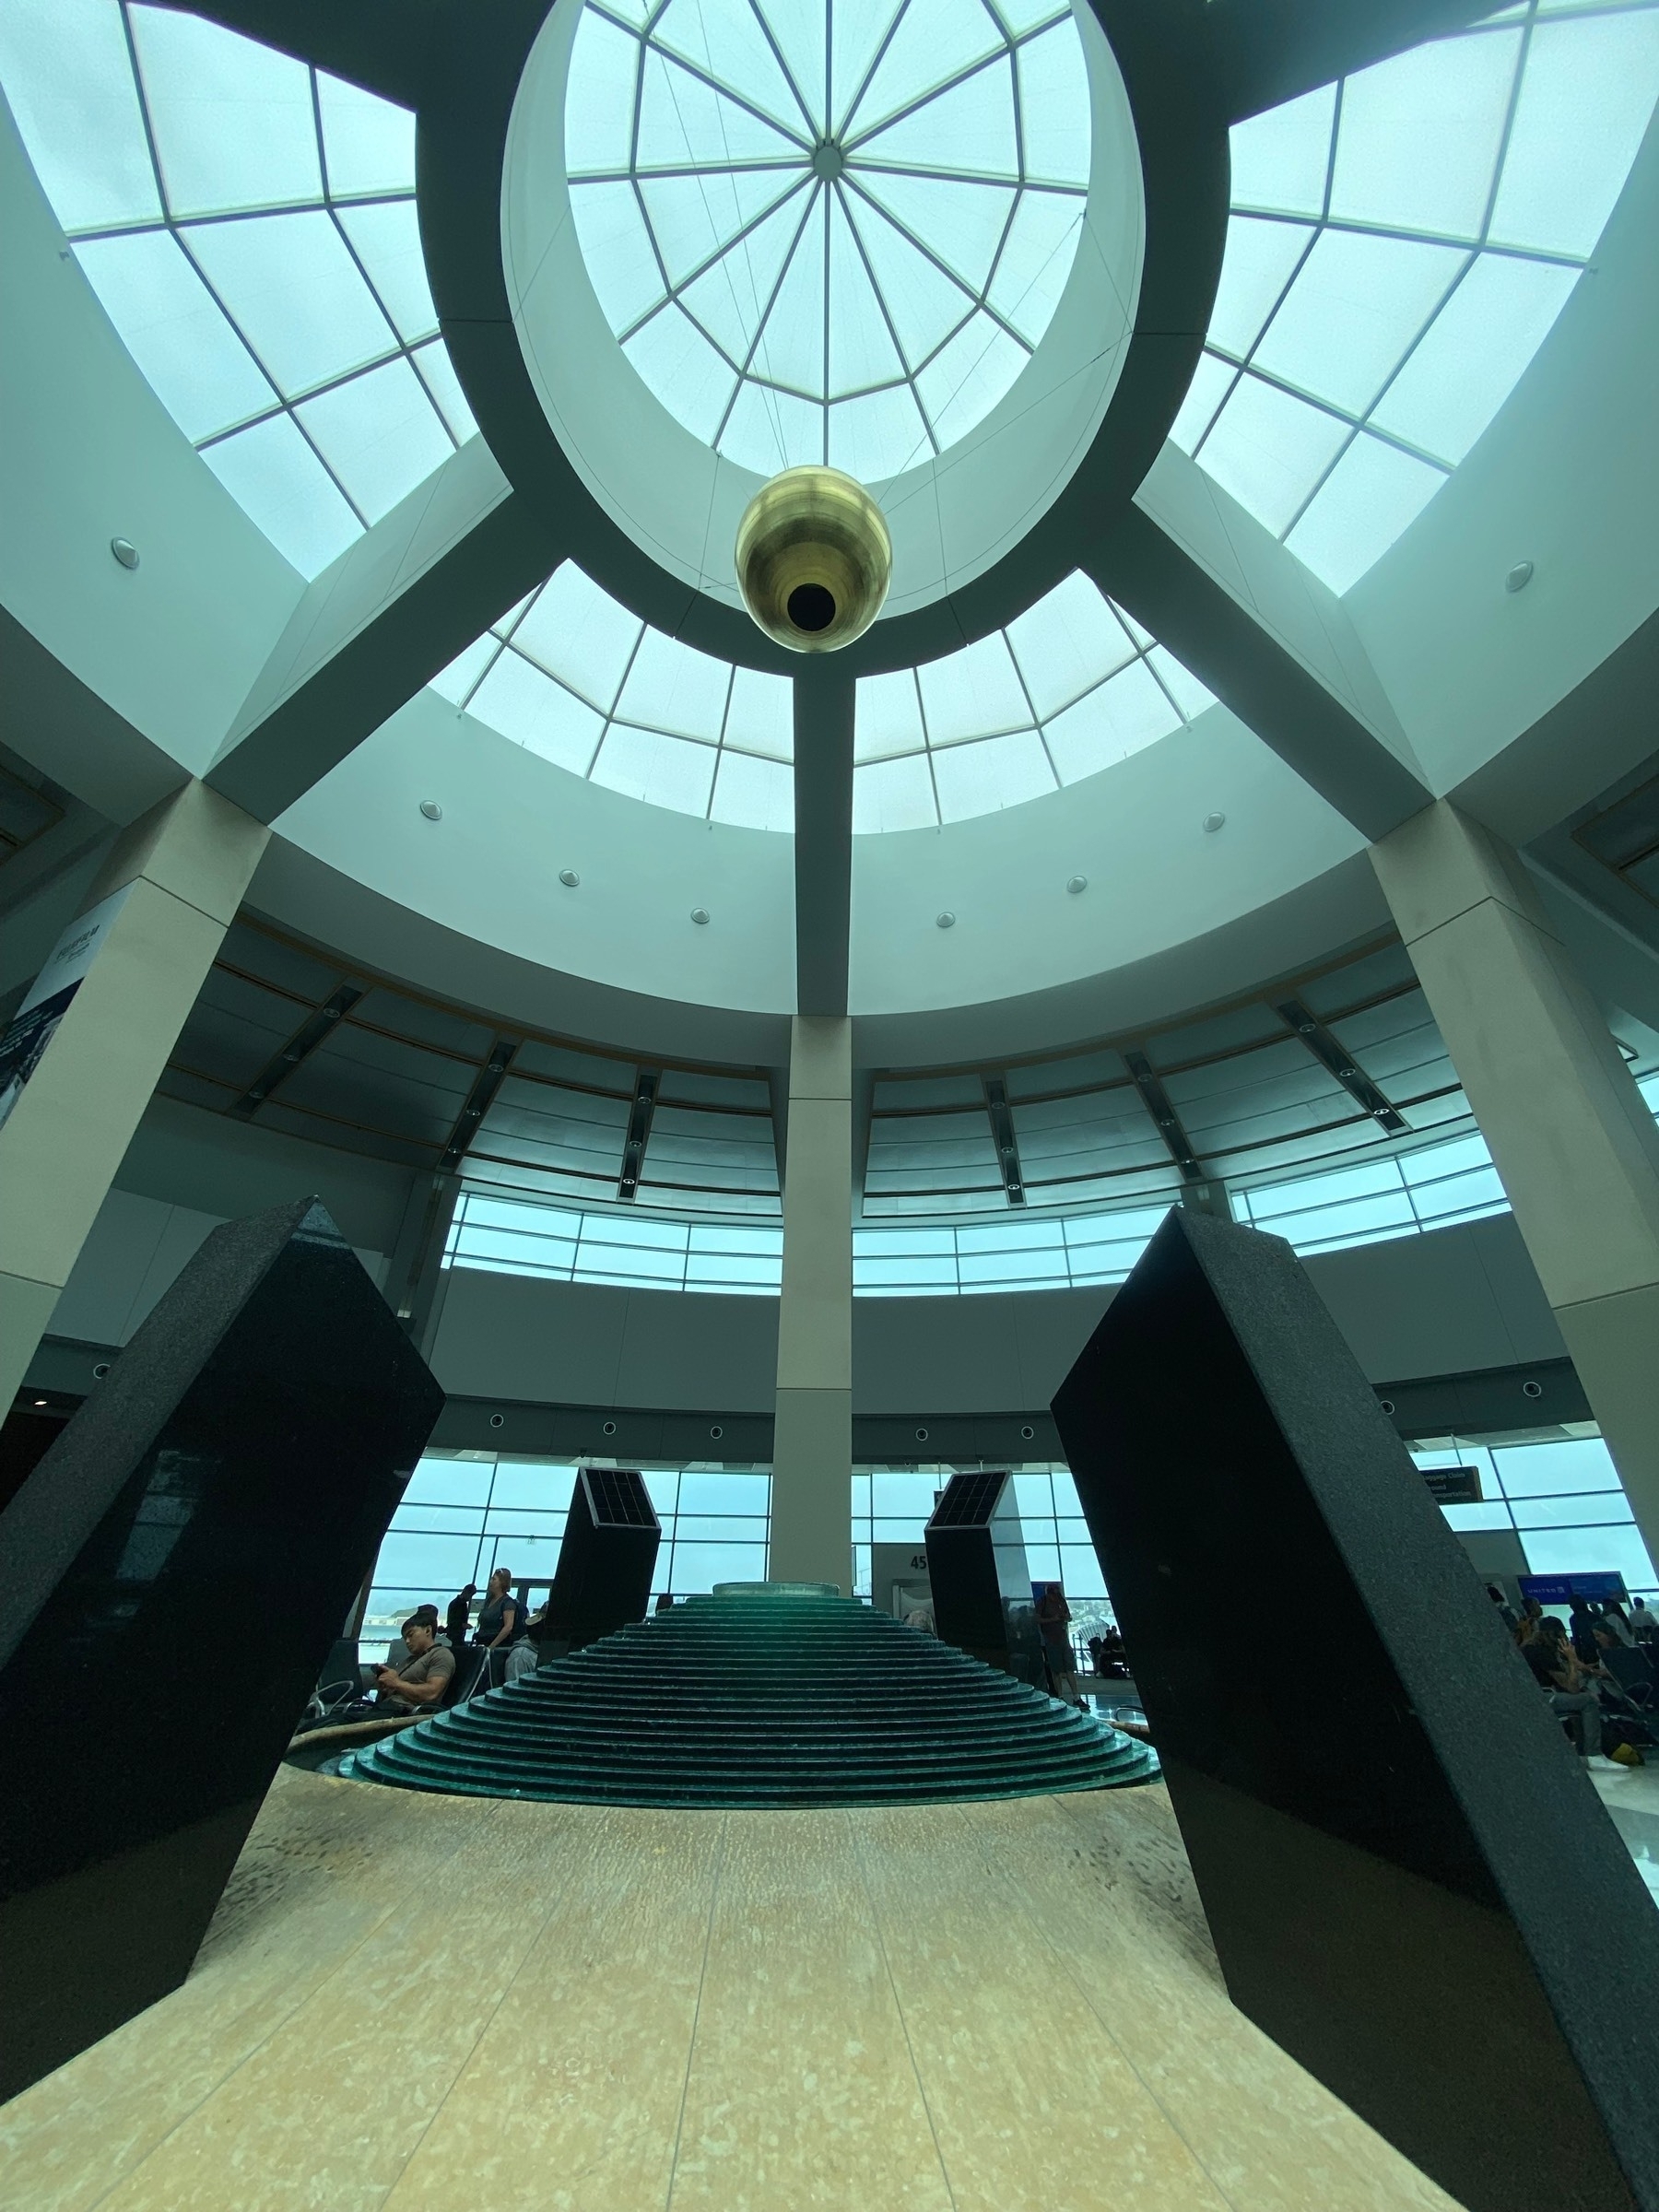 A circular fountain surrounded by obelisk below a golden ball hanging from a domed skylight.